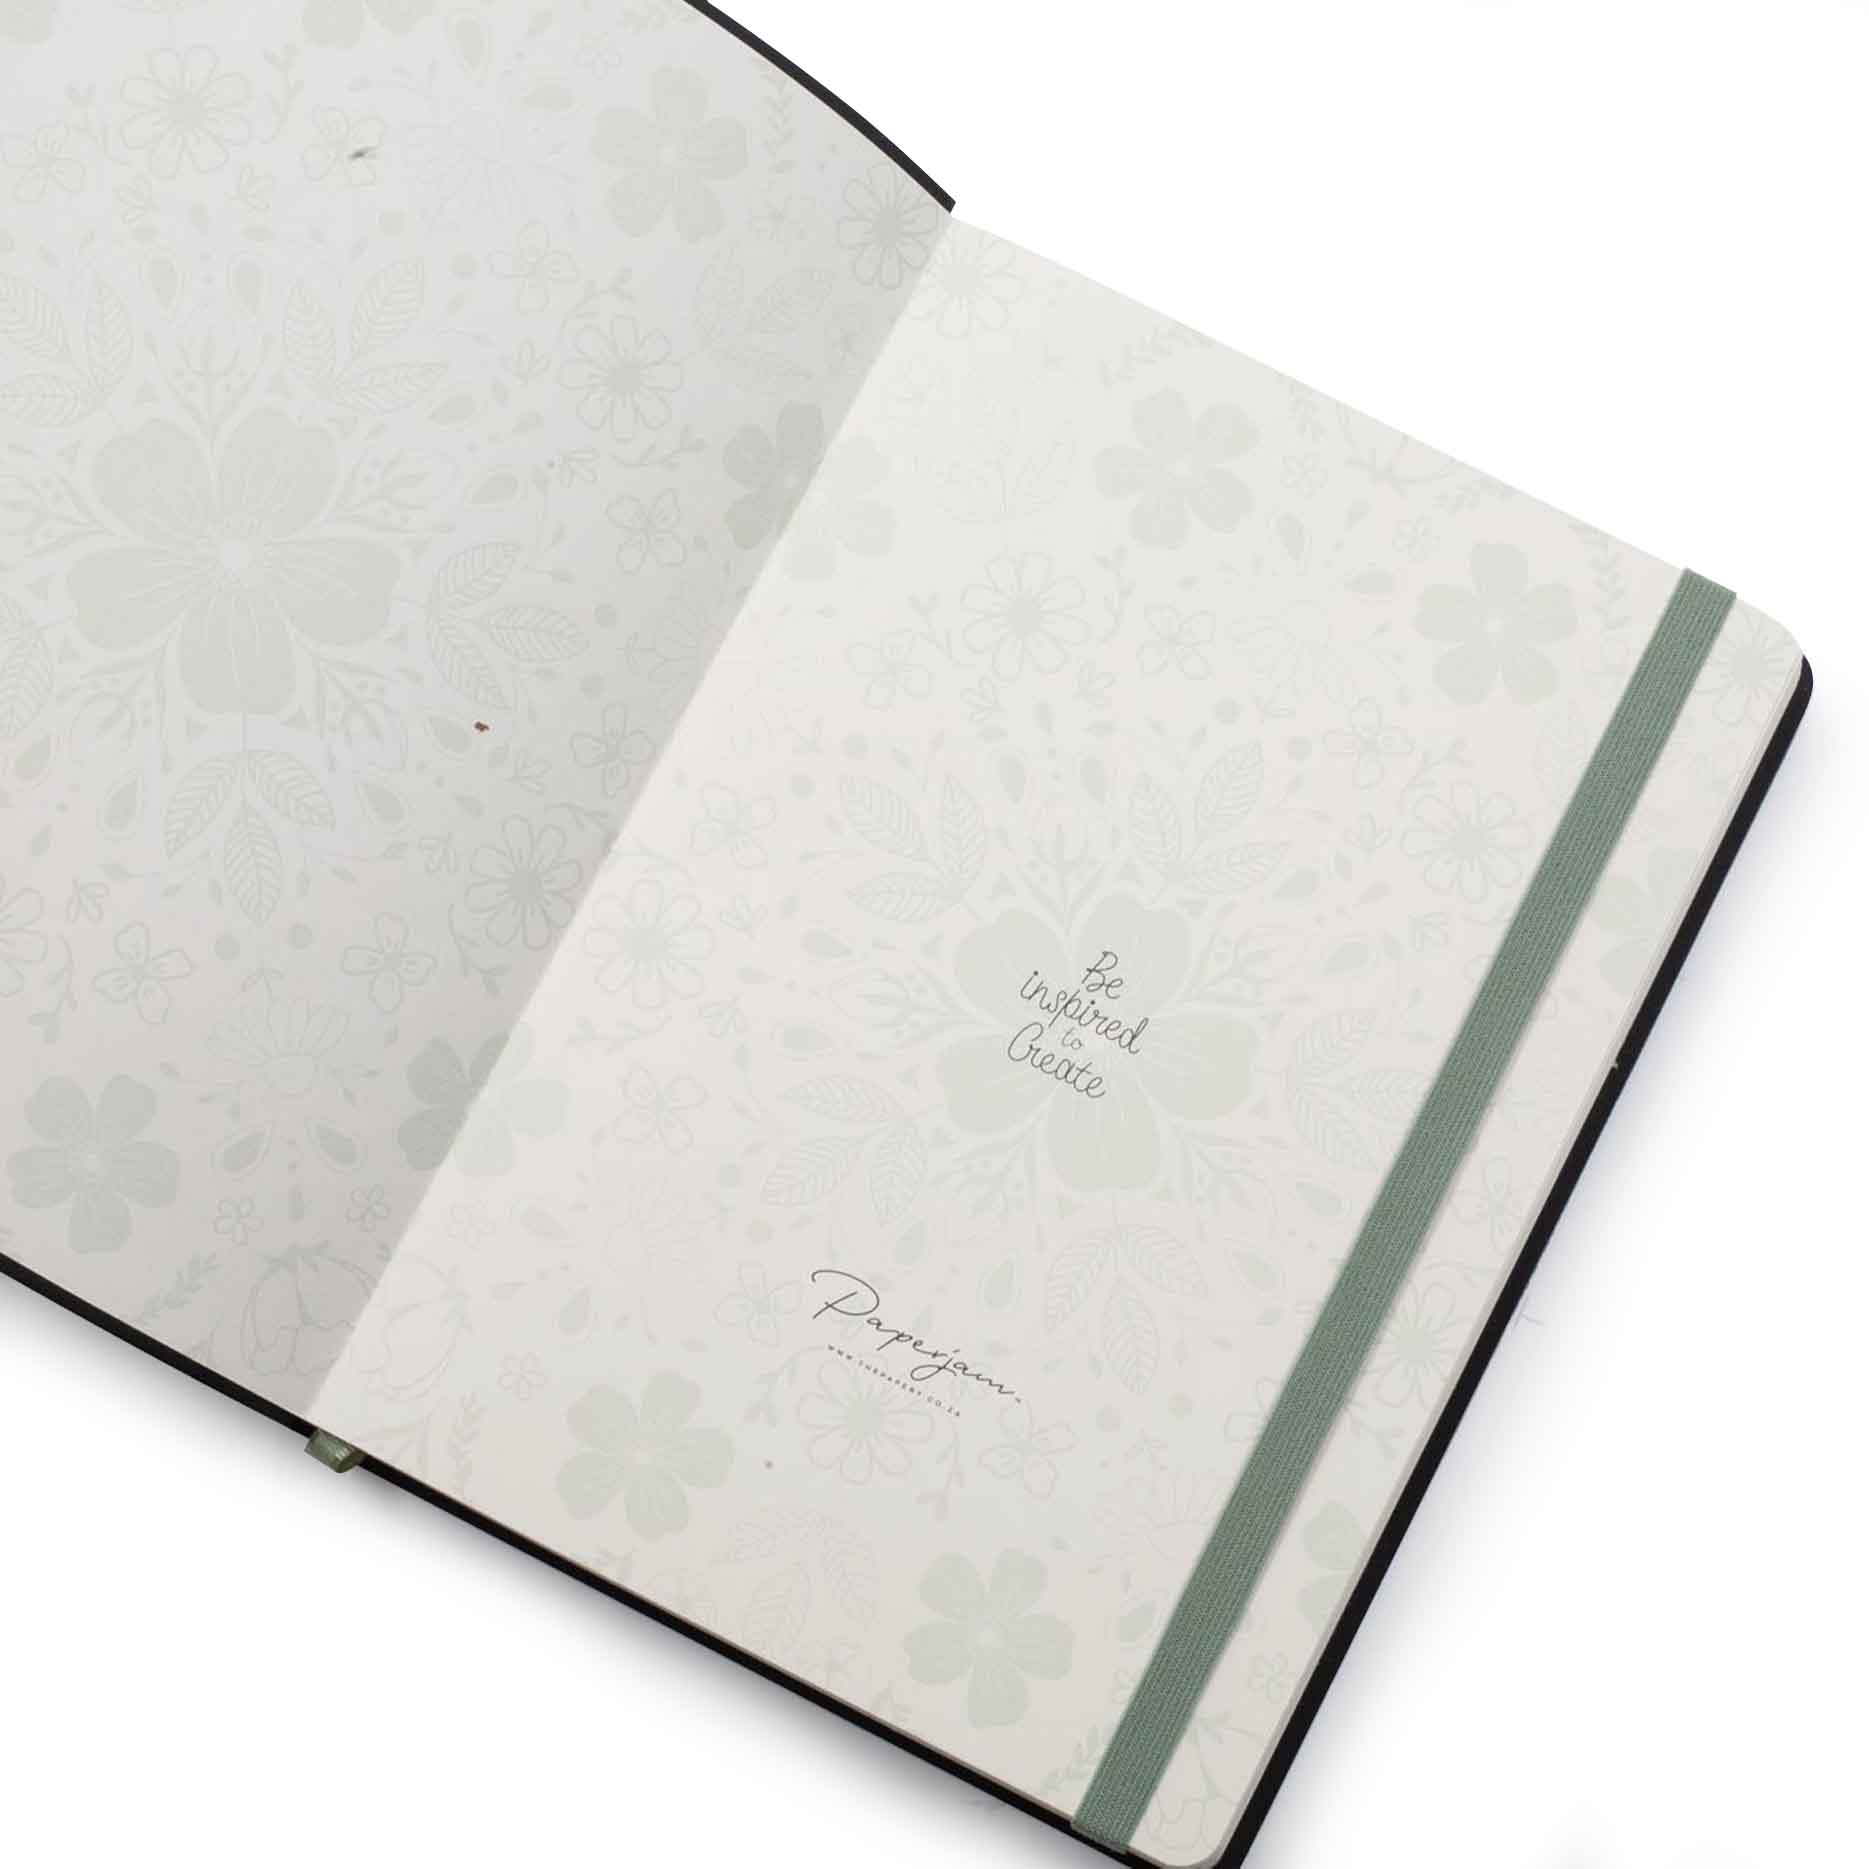 Image shows the endpapers of a sage Flexi Premium journal